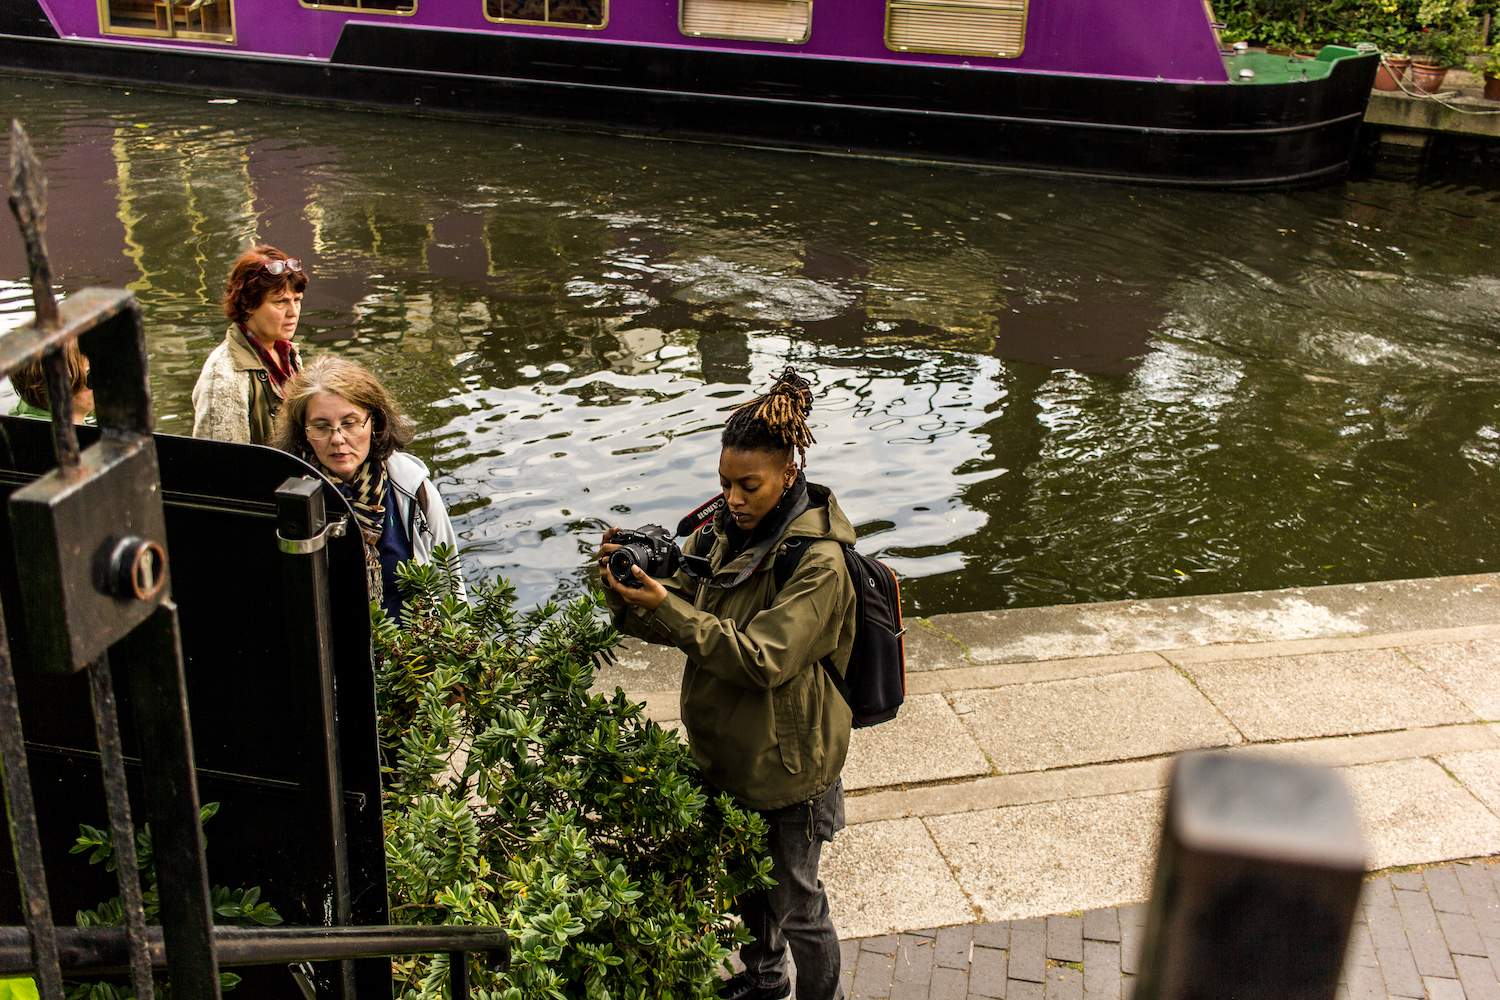 Professional Photography Black Woman In Khaki Jacket And Black Backpack Next To Canal River And Boats Filming With Camera In Little Venice Paddington London